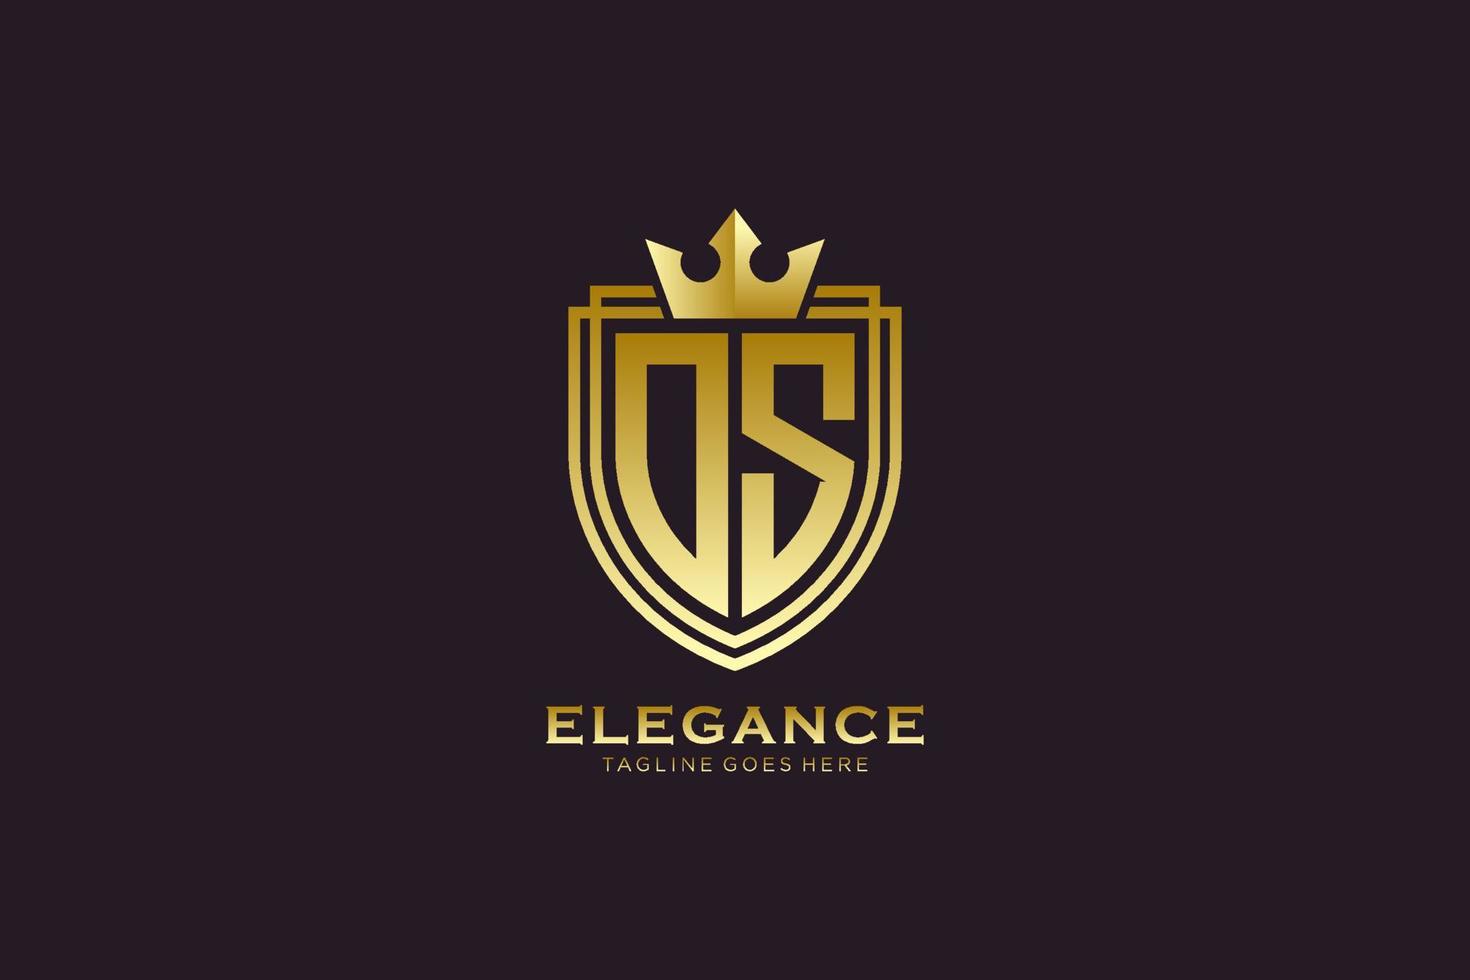 initial OS elegant luxury monogram logo or badge template with scrolls and royal crown - perfect for luxurious branding projects vector